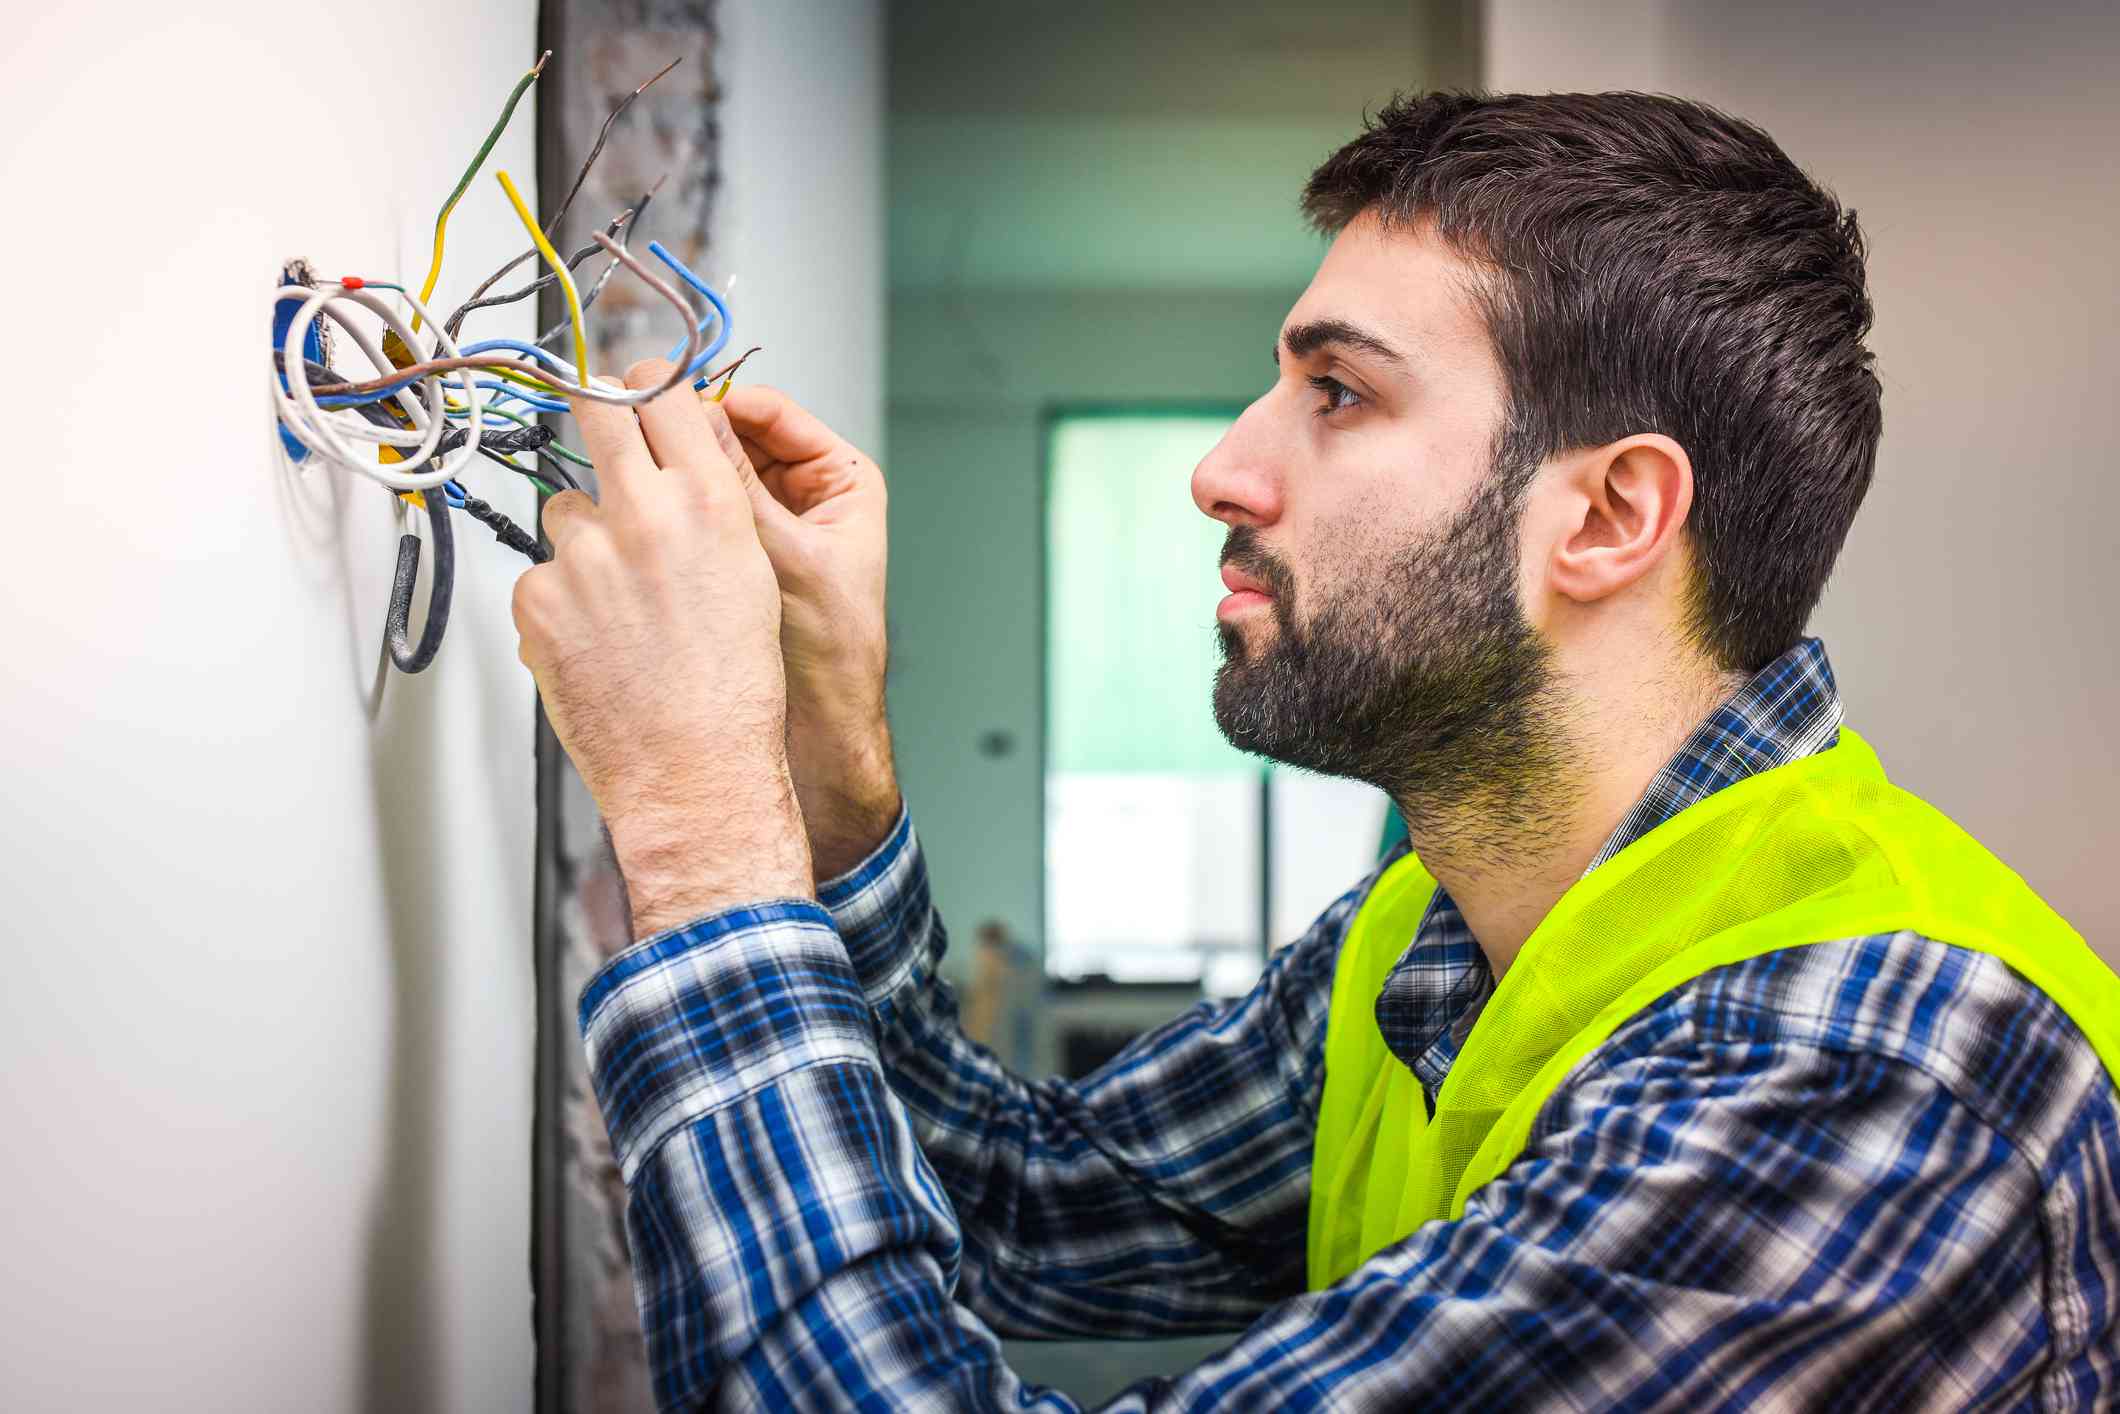 What is commonly caused by electrical injuries?